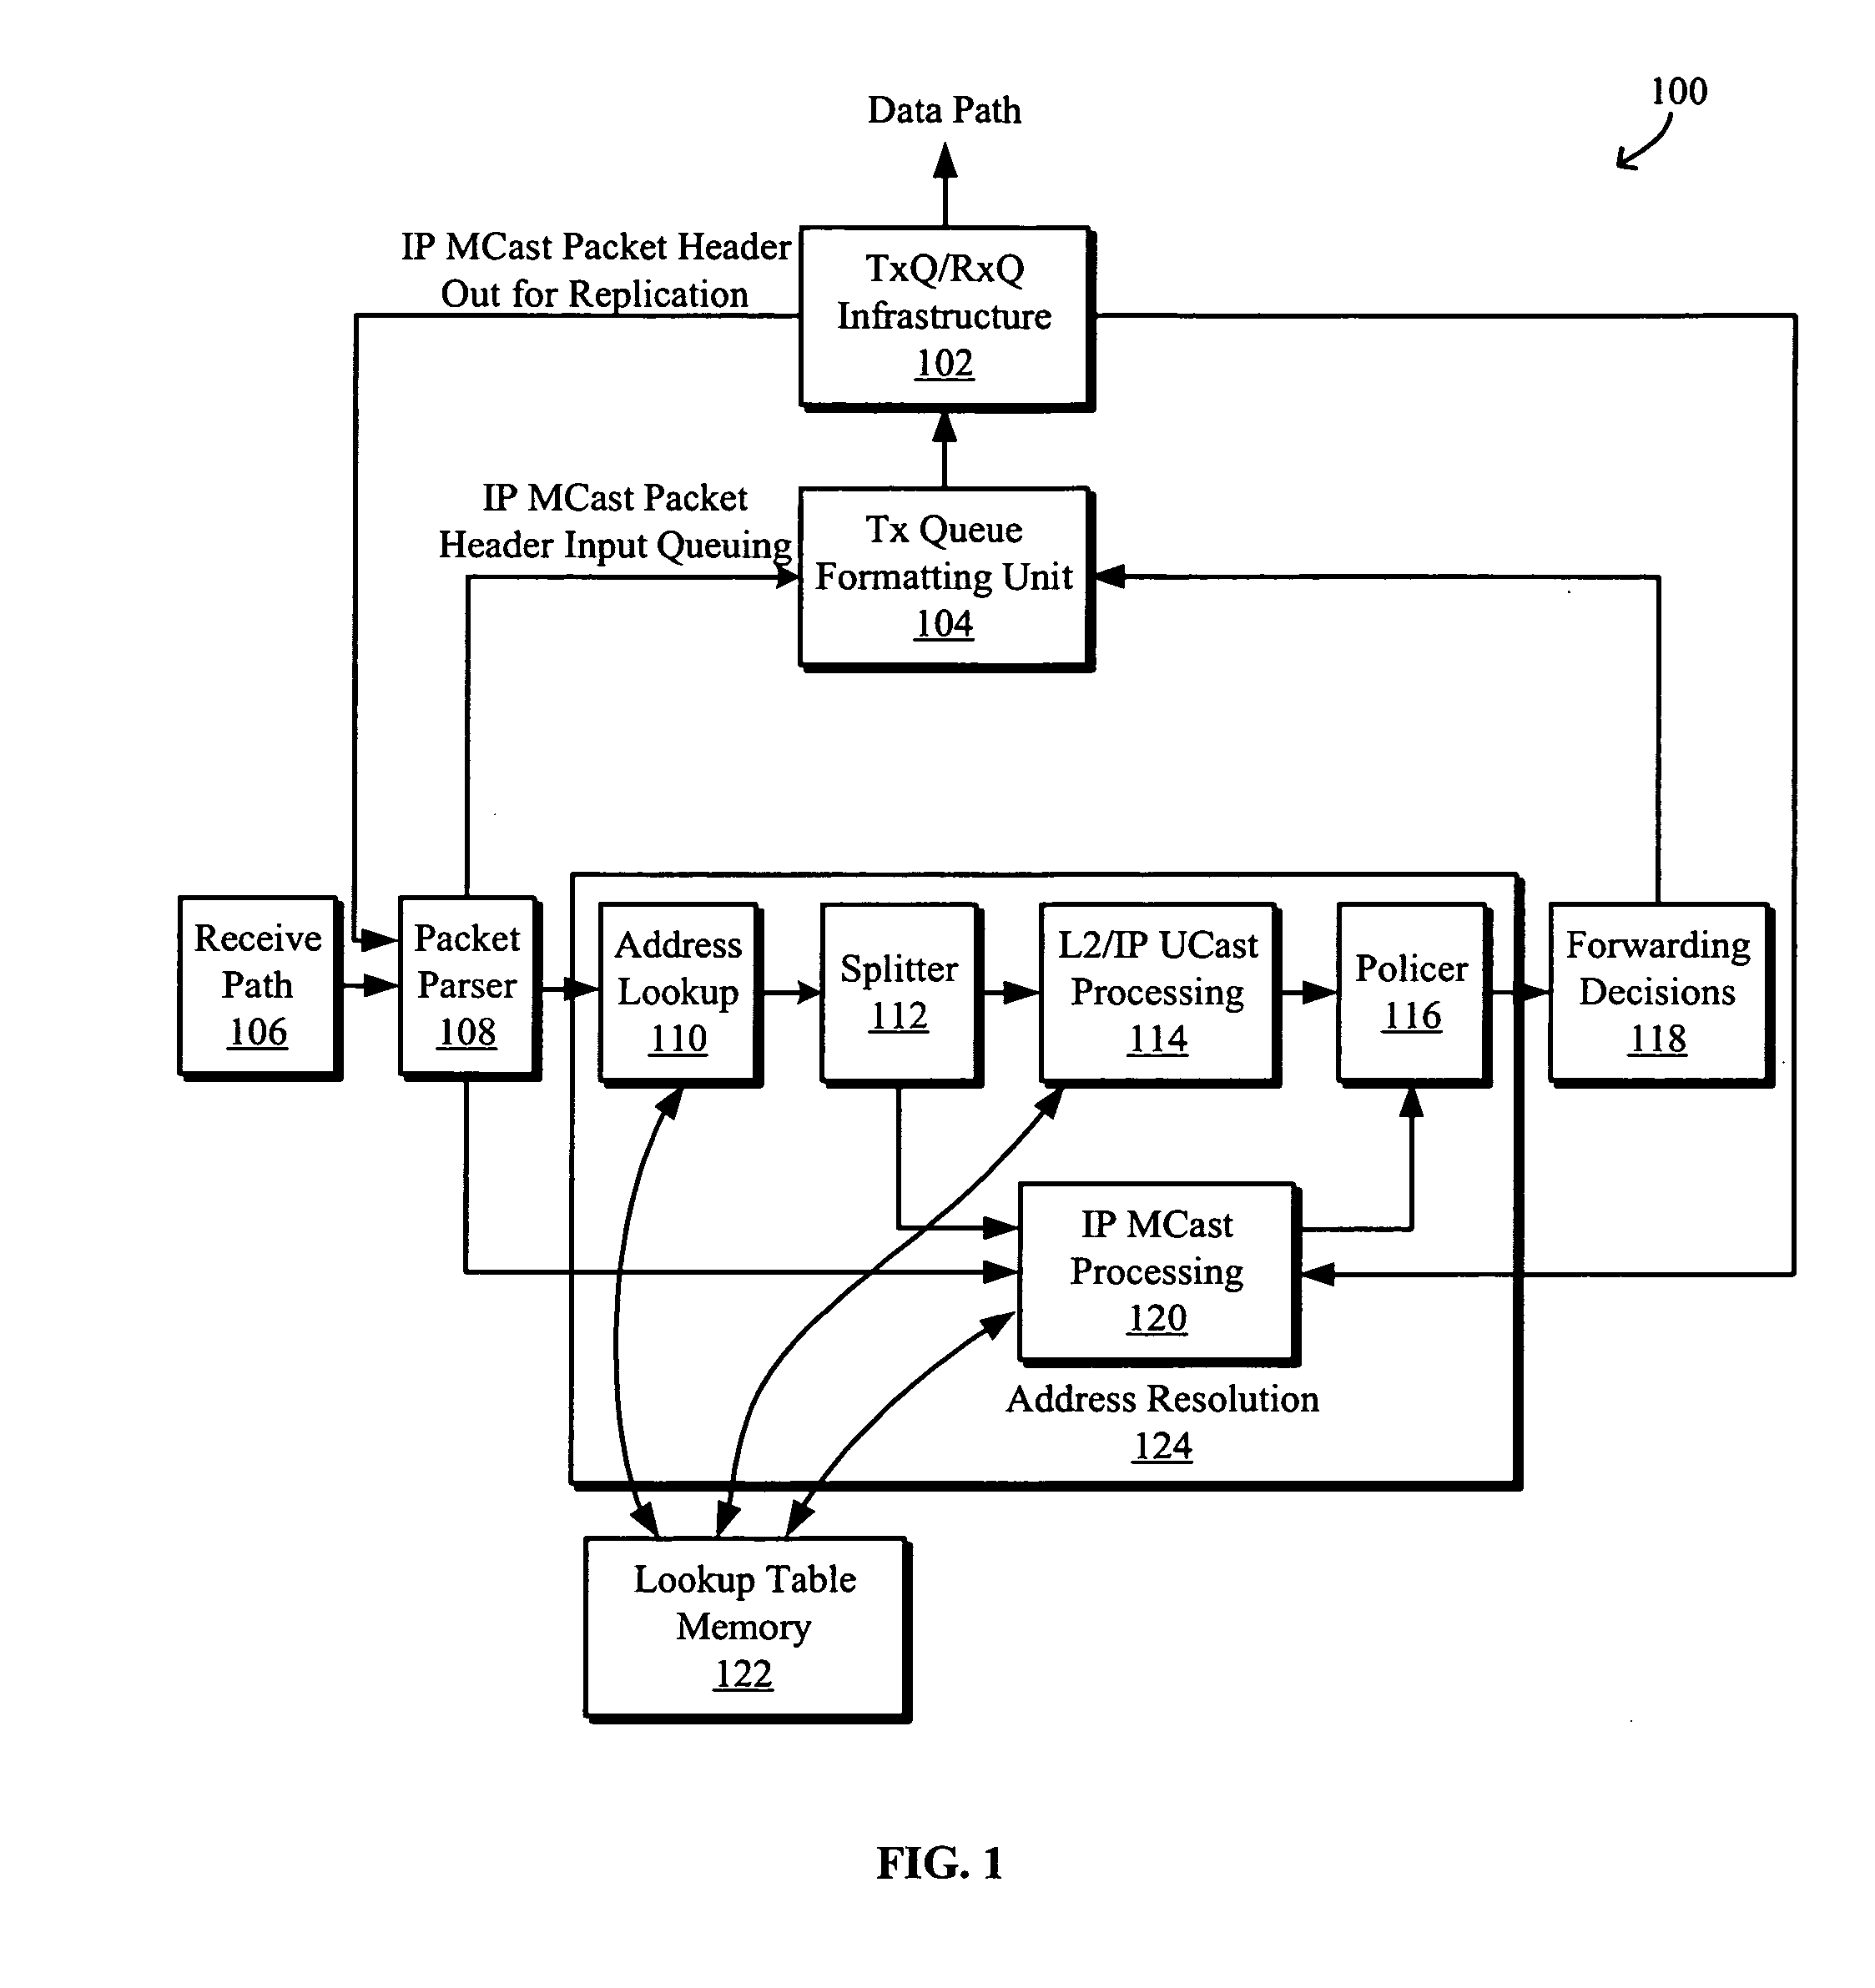 IP multicast packet burst absorption and multithreaded replication architecture